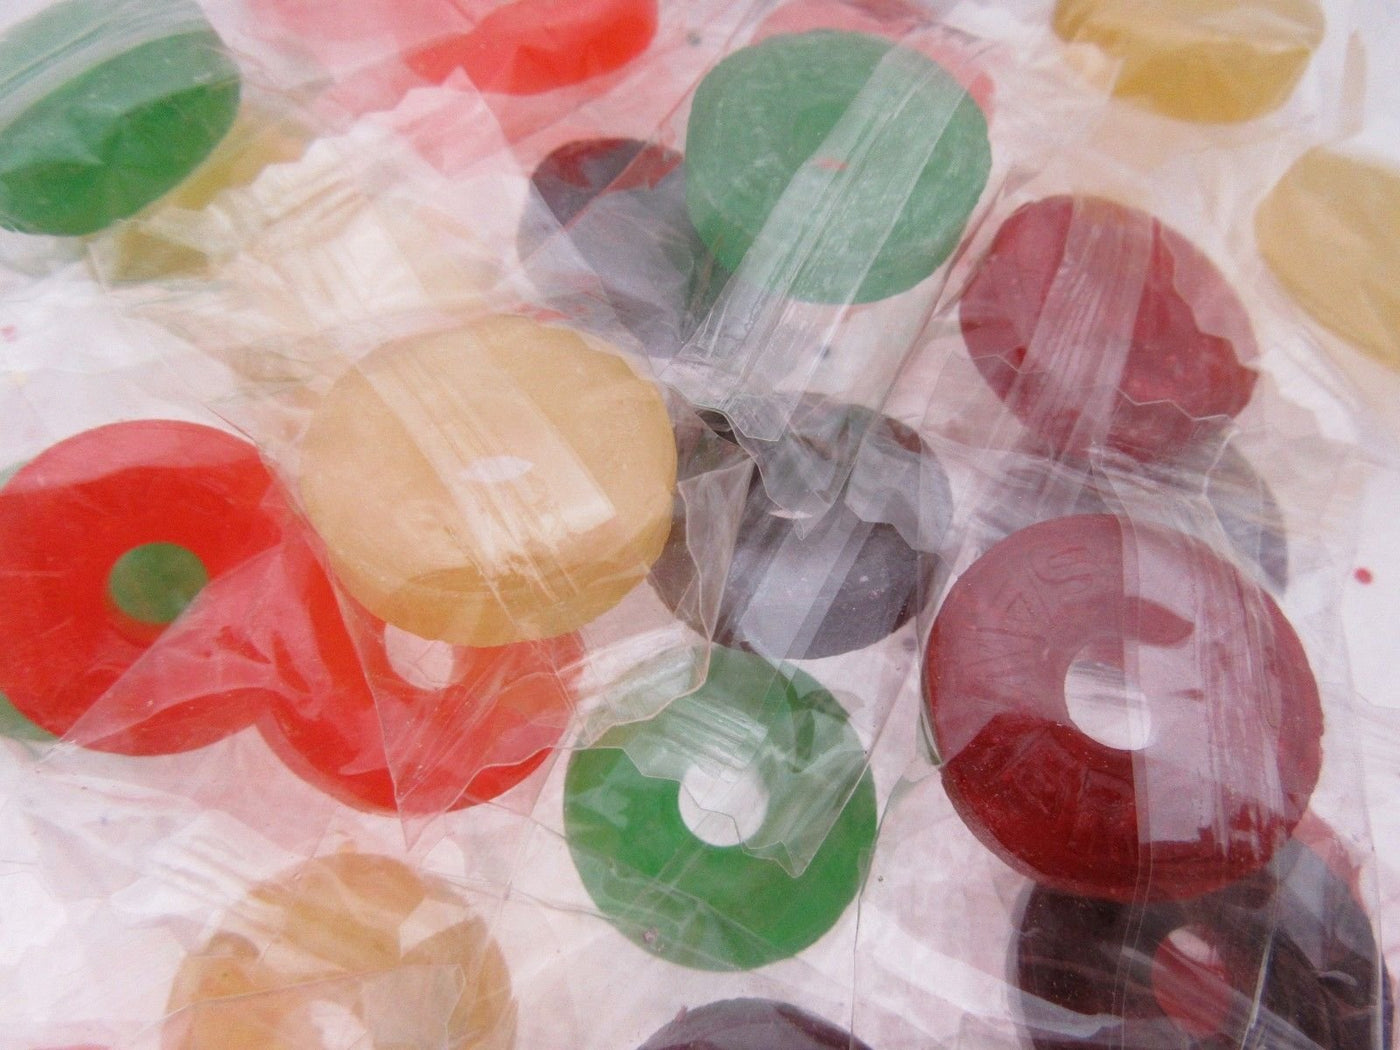 Lifesavers 8oz ~ 12 Flavor Mix Hard Candy Individually wrapped candies